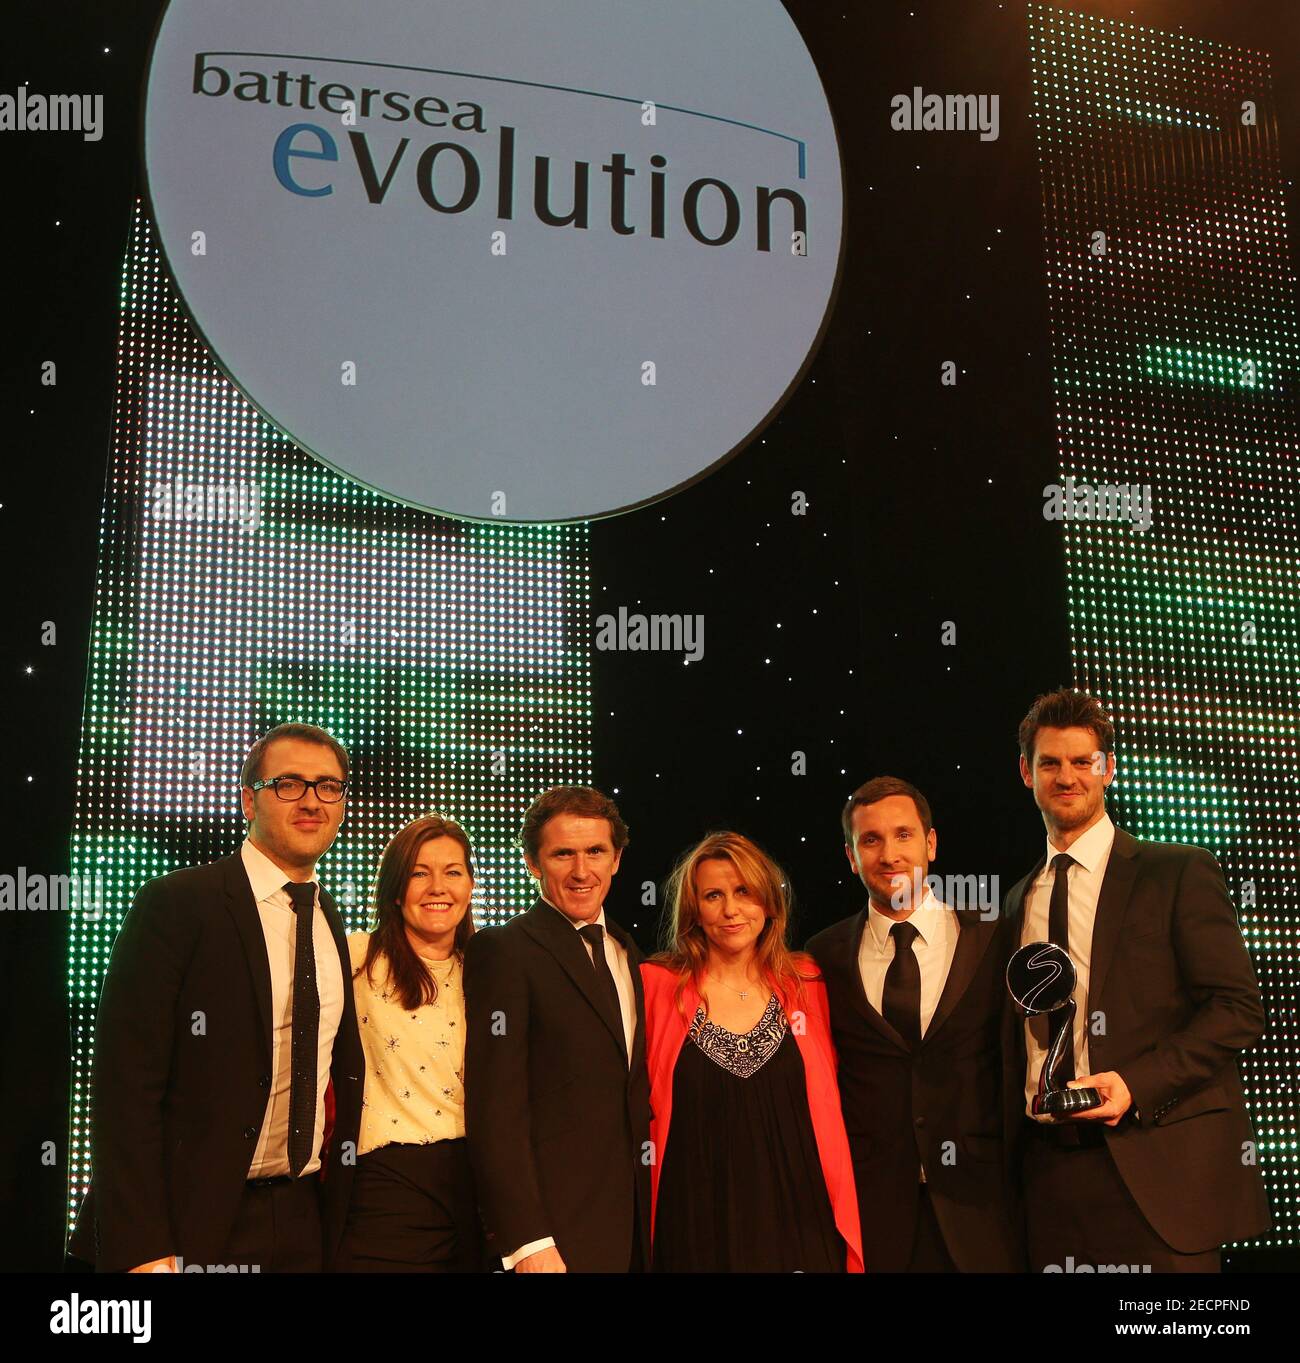 General Sport - The BT Sport Industry Awards - Battersea Evolution - 2/5/13  Donna Bellamy, Steve Marks, Sarah Gower, Joe Carby and Barry Moore recieve  the Best Integrated Sport Marketing Campaign Award